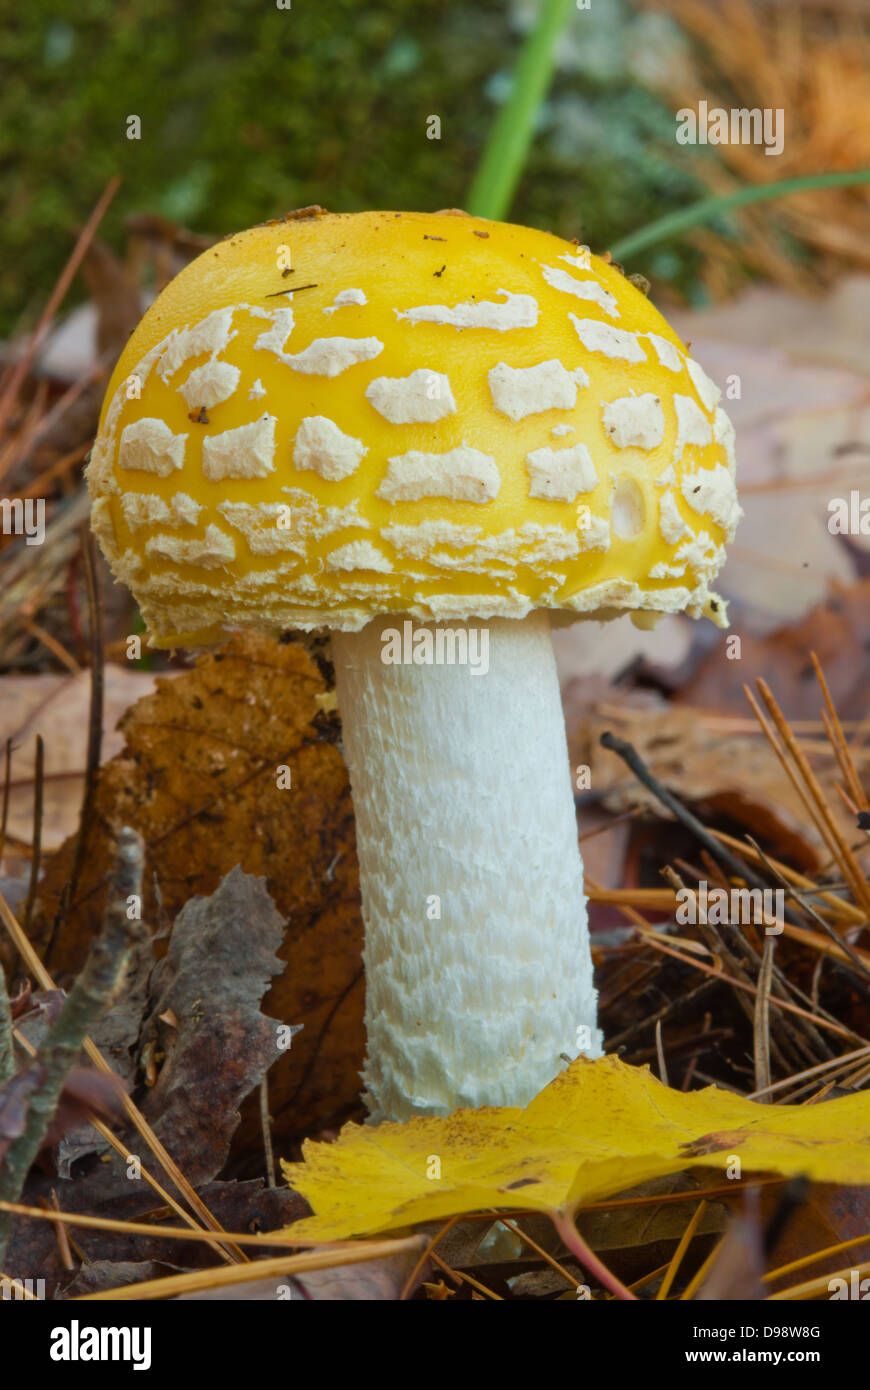 A single large yellow  fly agaric (Amanita muscaria) mushroom amongst leaves and pine needles Stock Photo